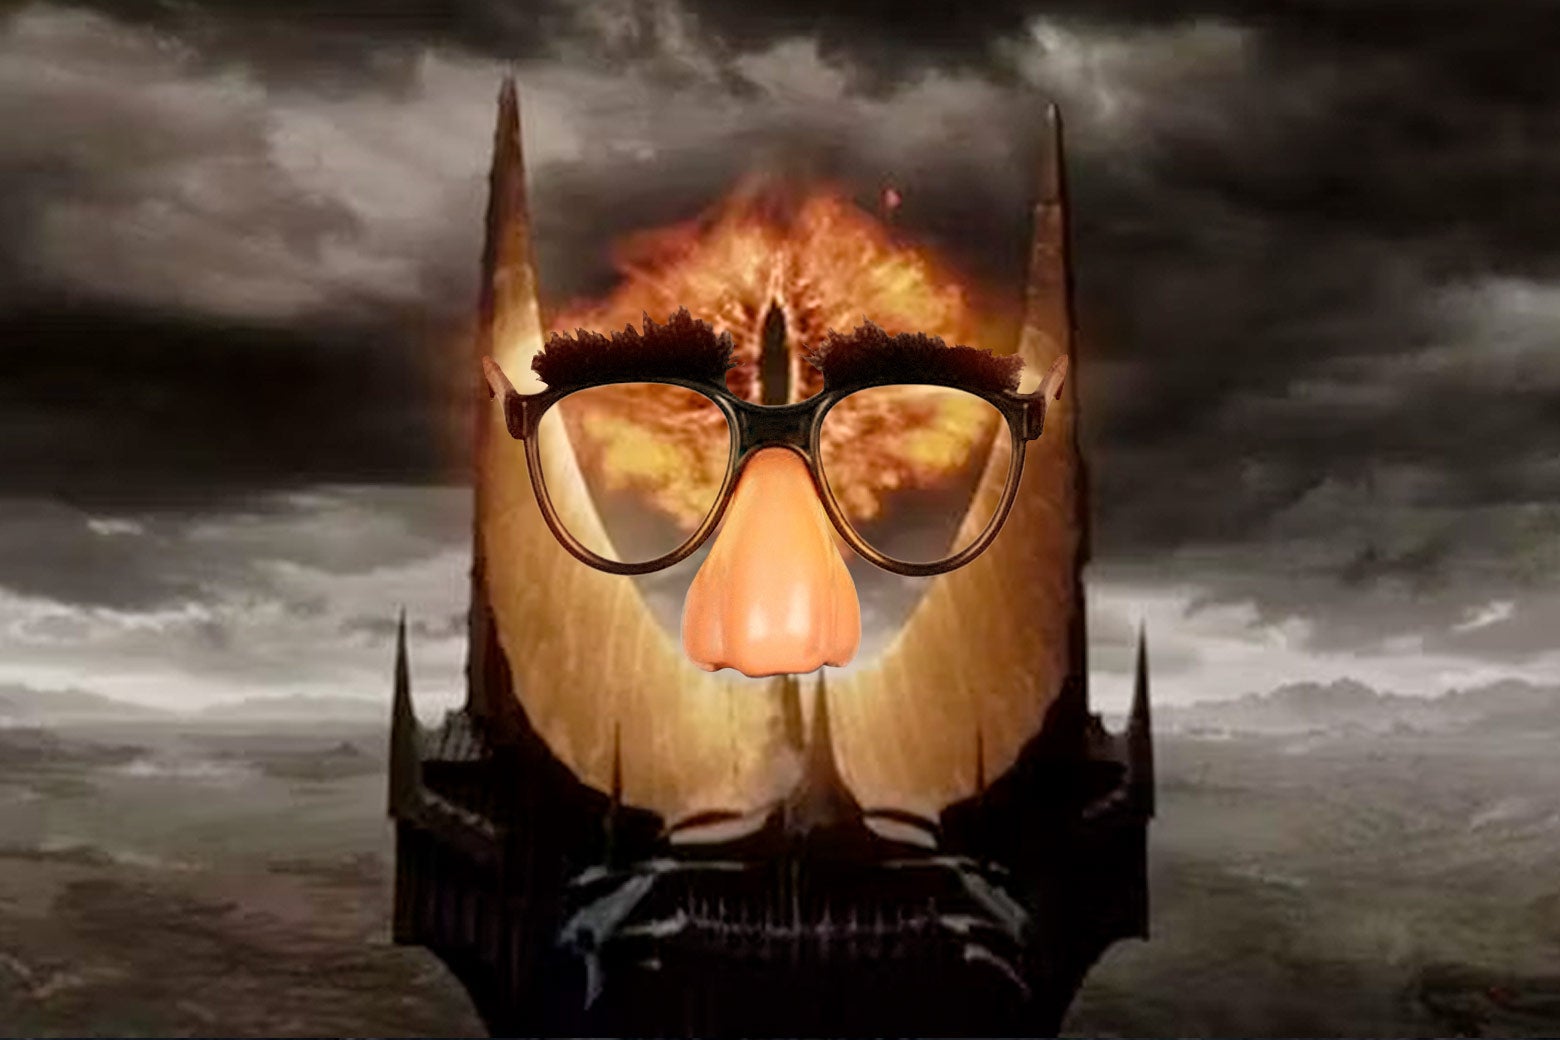 The fiery eye of Sauron, wearing glasses with bushy eyebrows and an oversized nose attached.